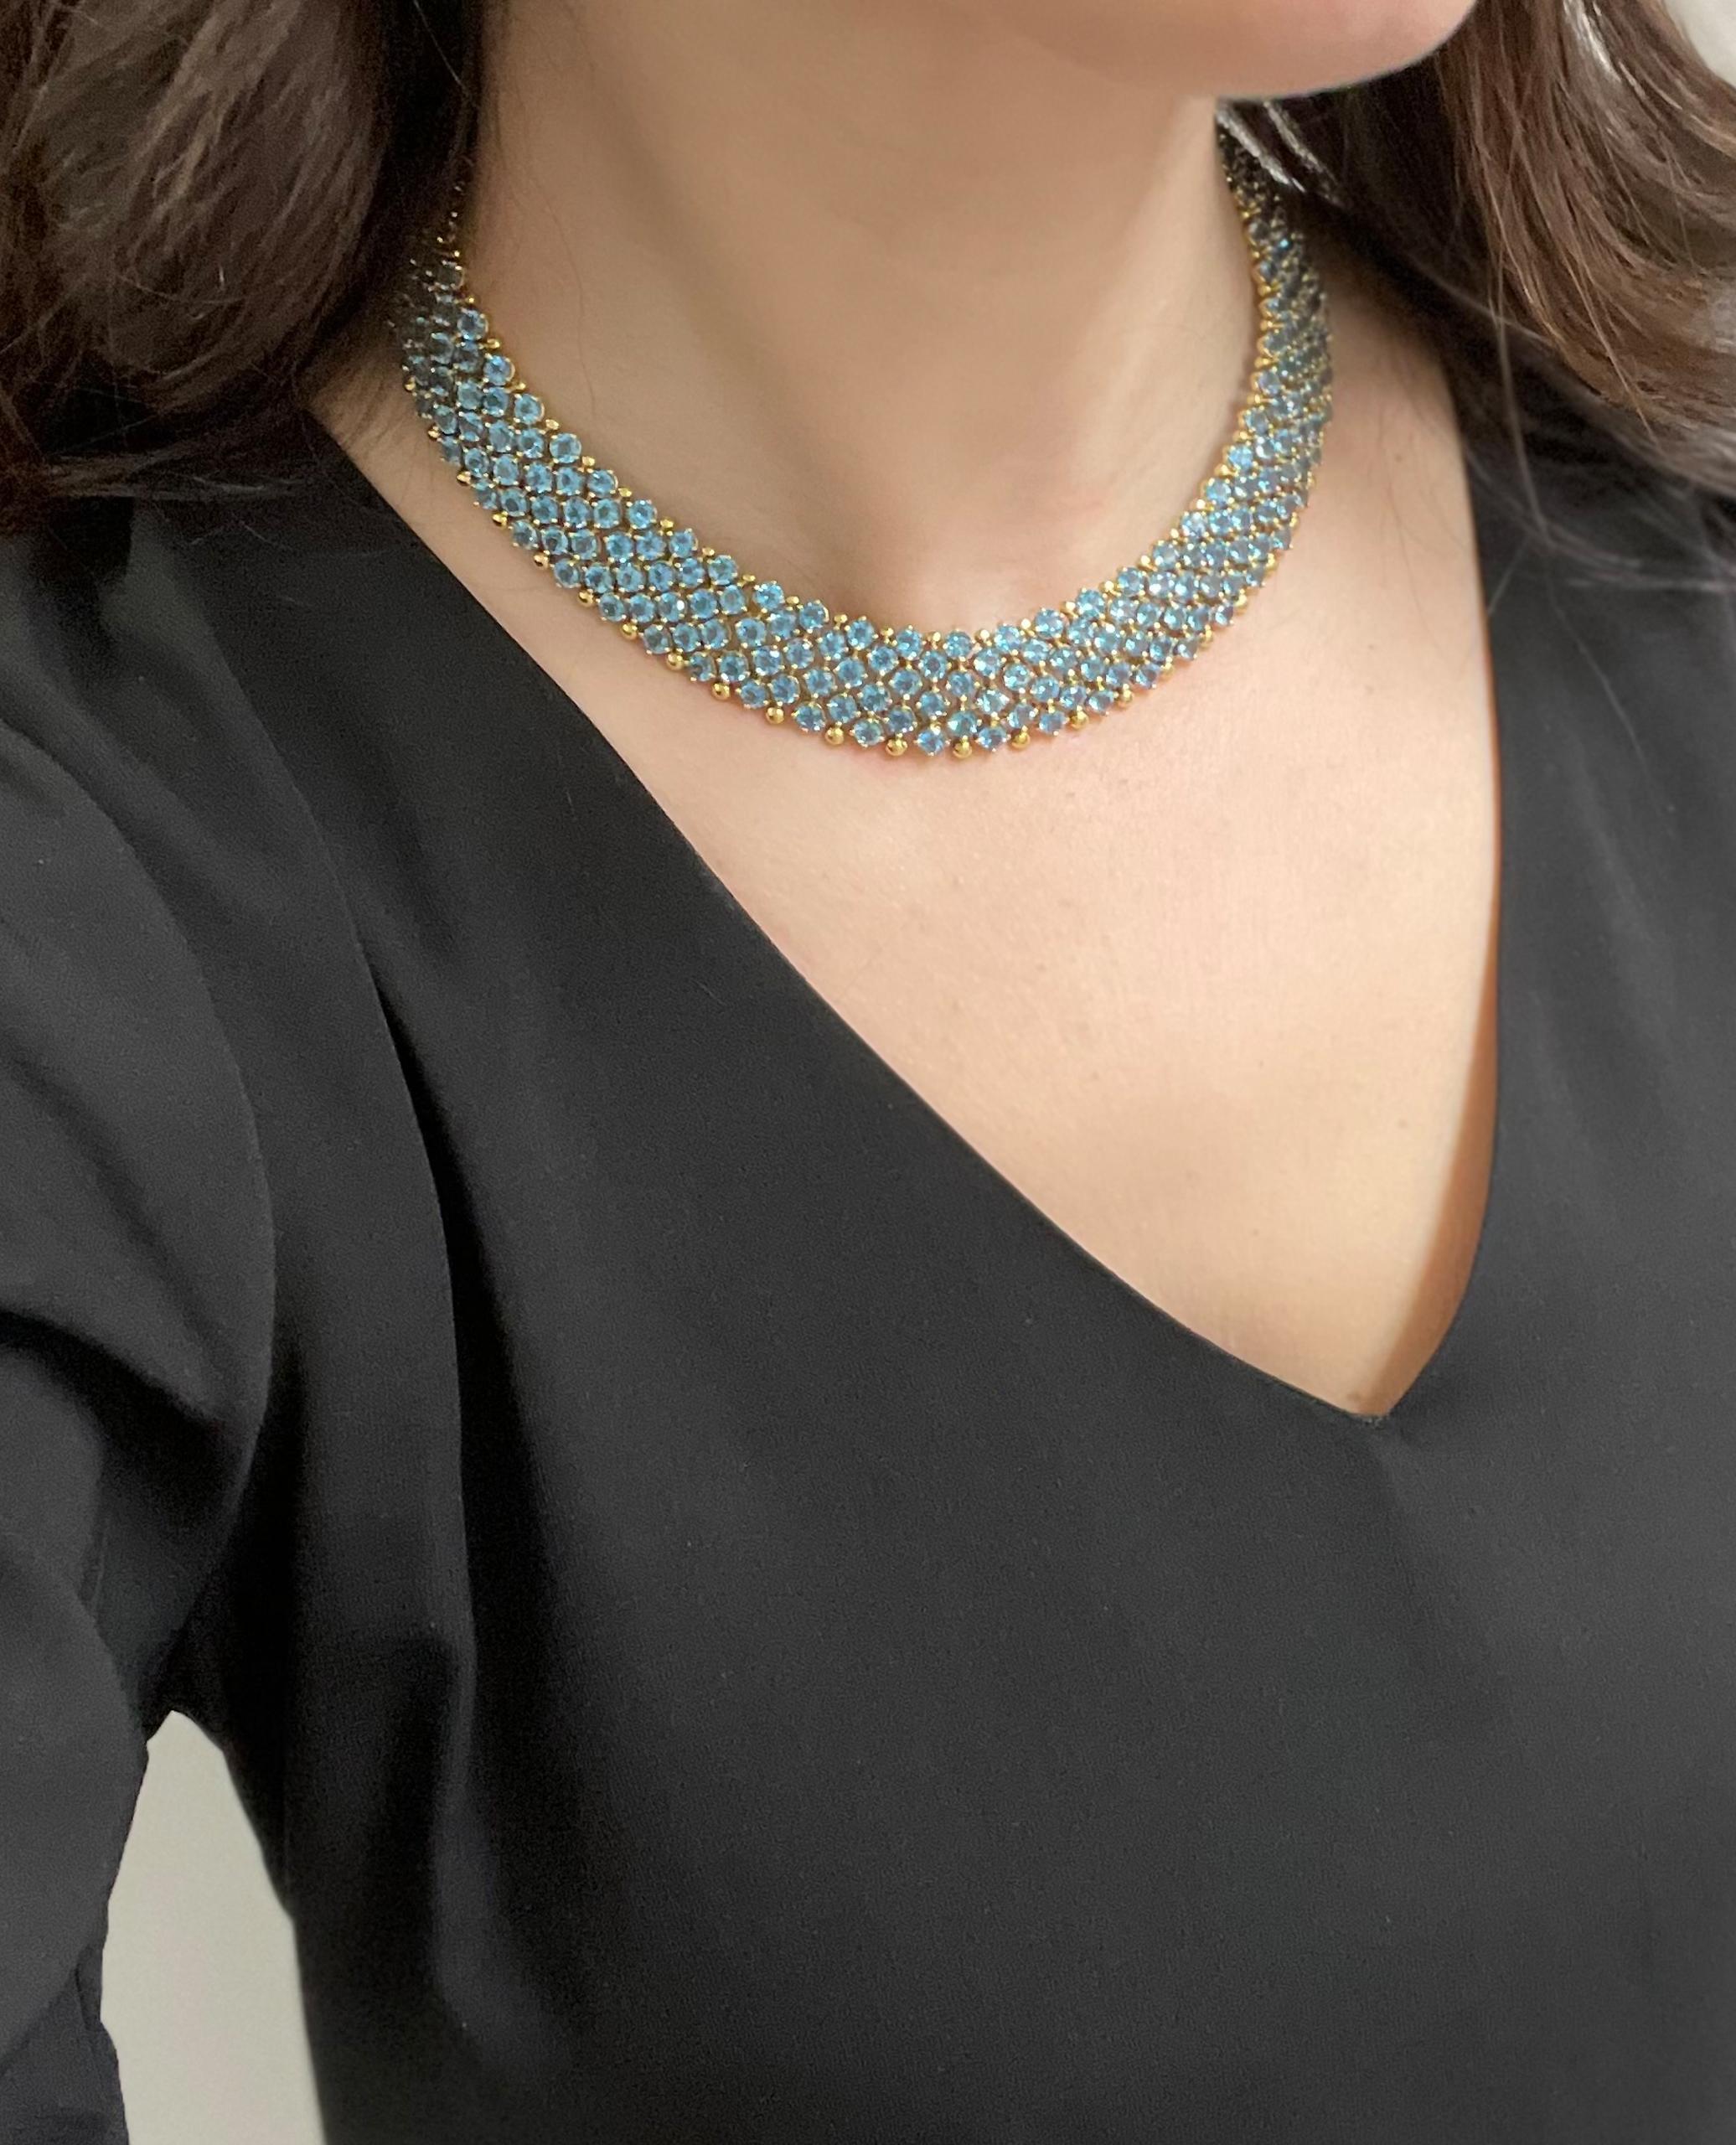 Exquisite 18k Collar Necklace with Blue Topaz For Sale 1